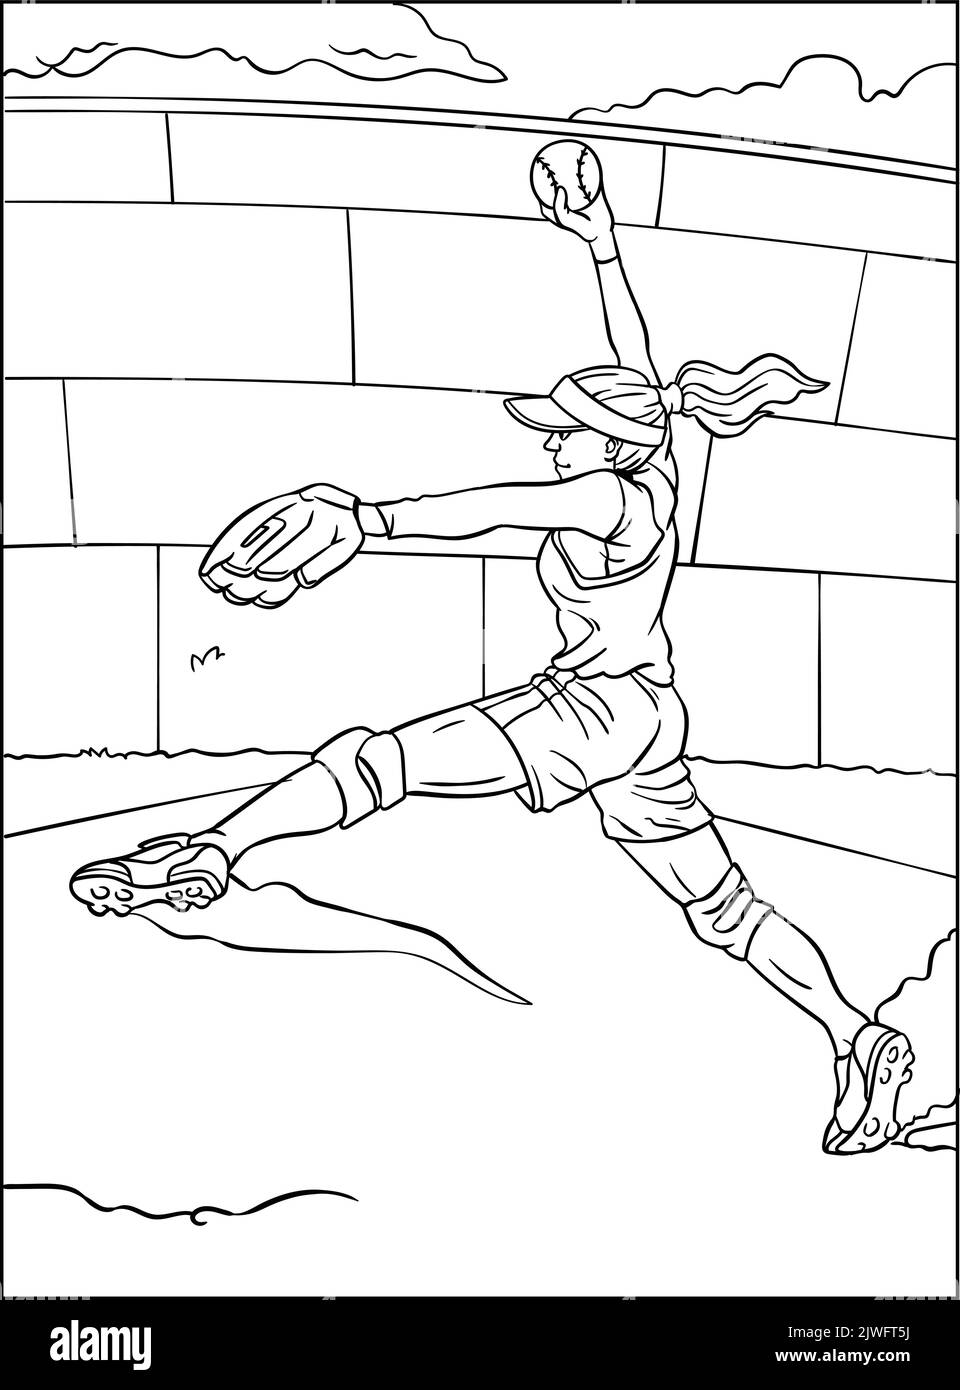 St Louis Cardinals Pitcher Baseball Coloring Page